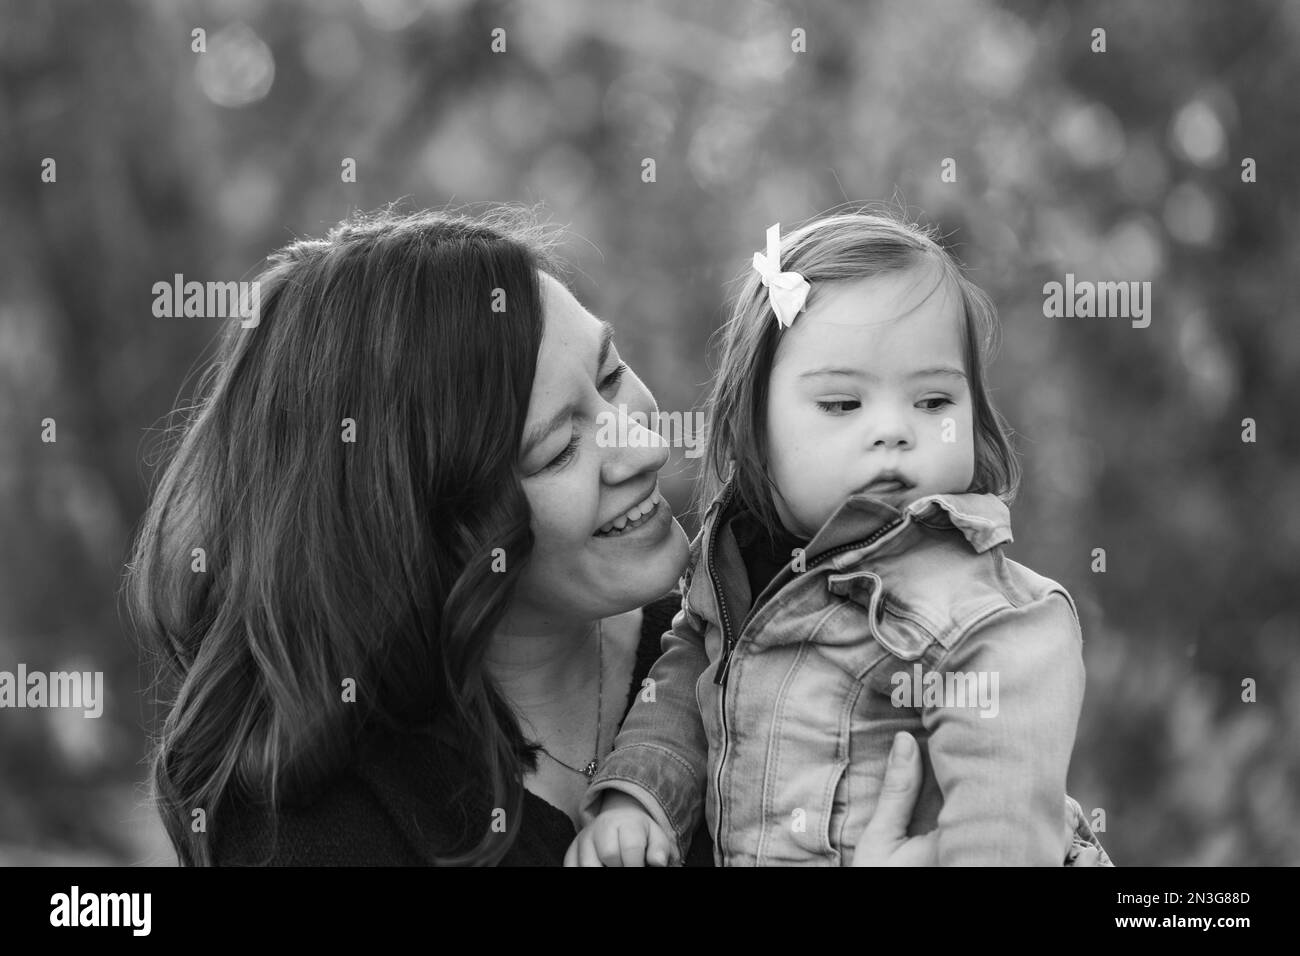 Portrait of a mother and her baby girl with Down Syndrome spending quality time outdoors during a family outing at a city park Stock Photo